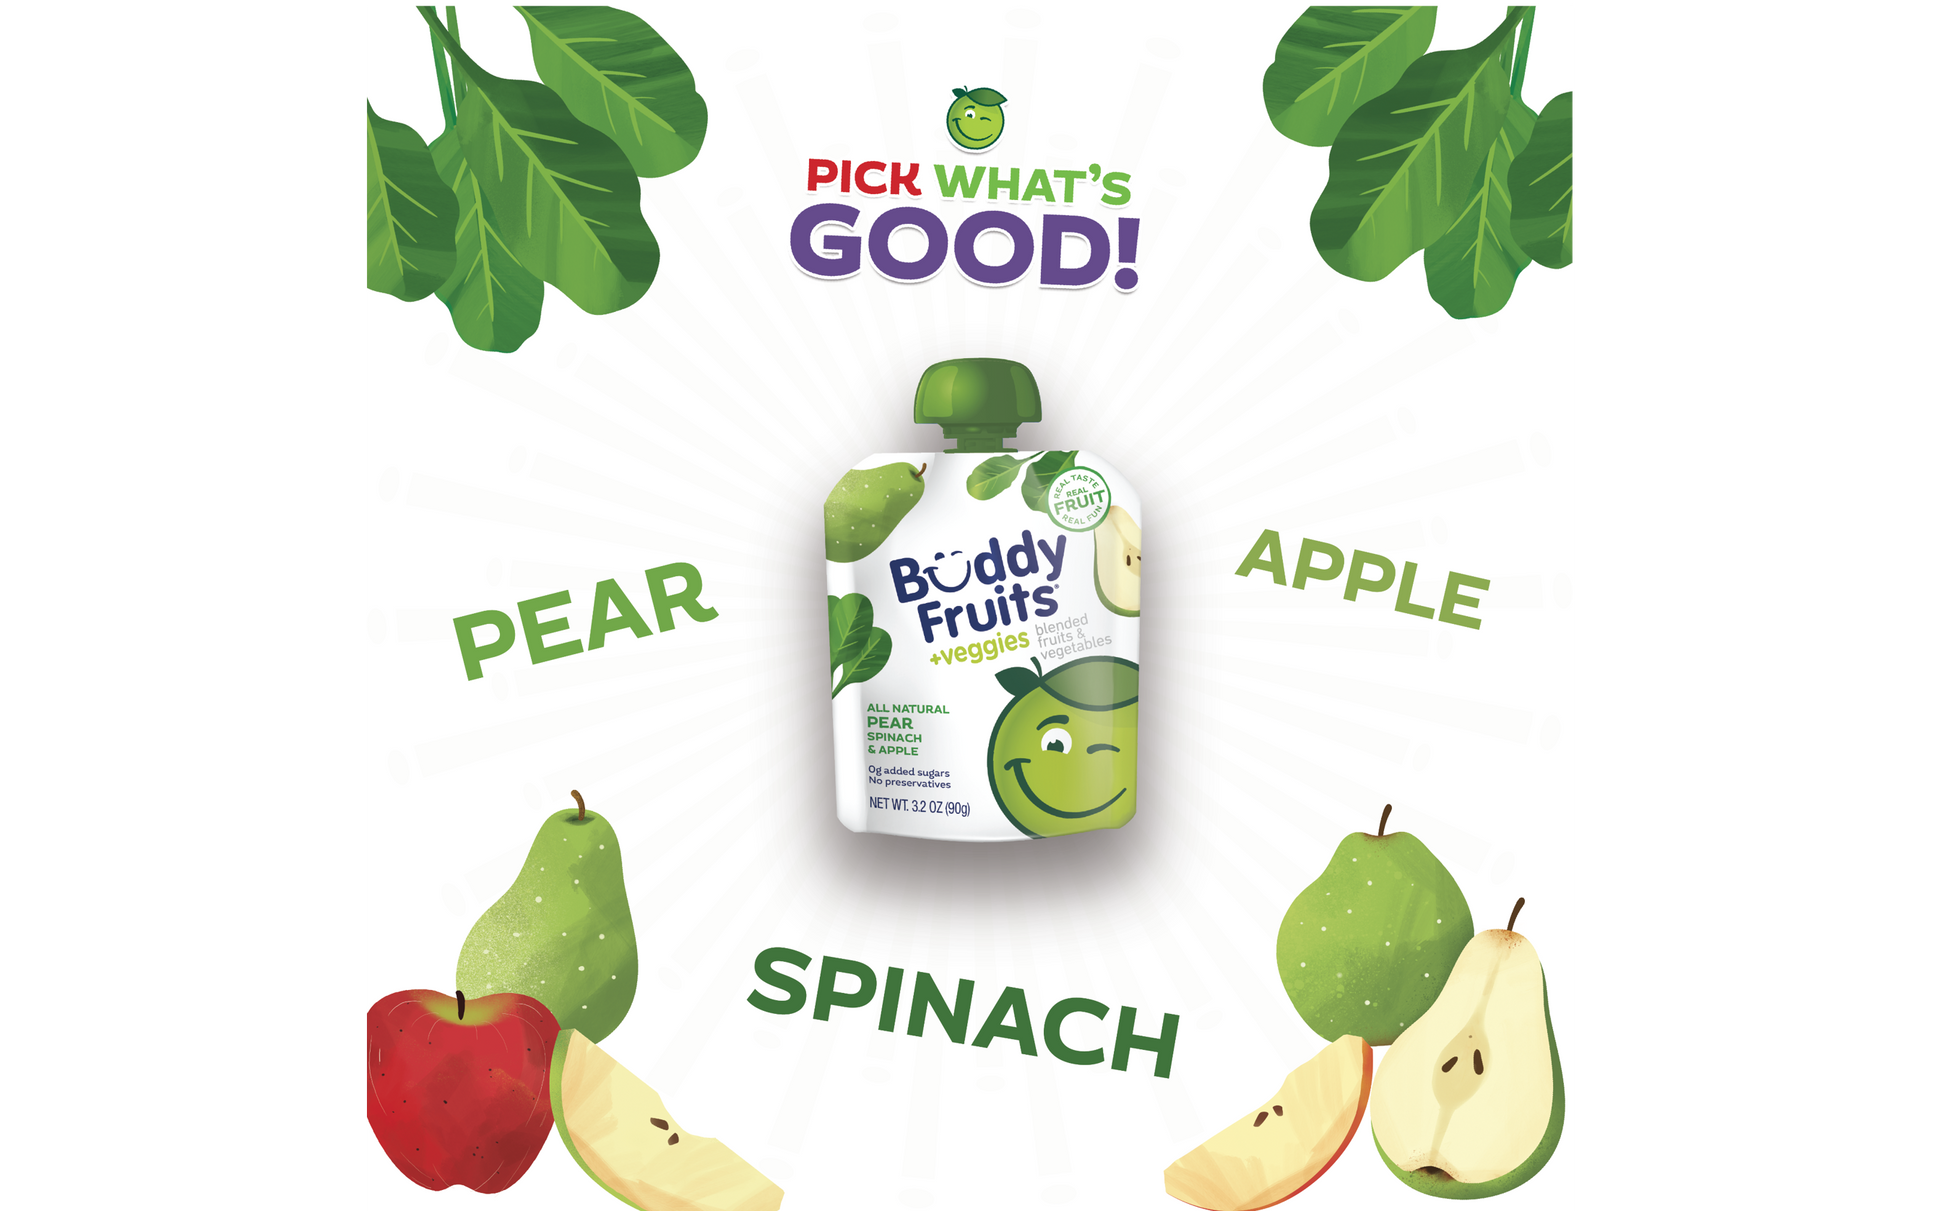 Pick What's Good: Buddy Fruit Pear, Spinach & Apple fruit & veggies pouch.